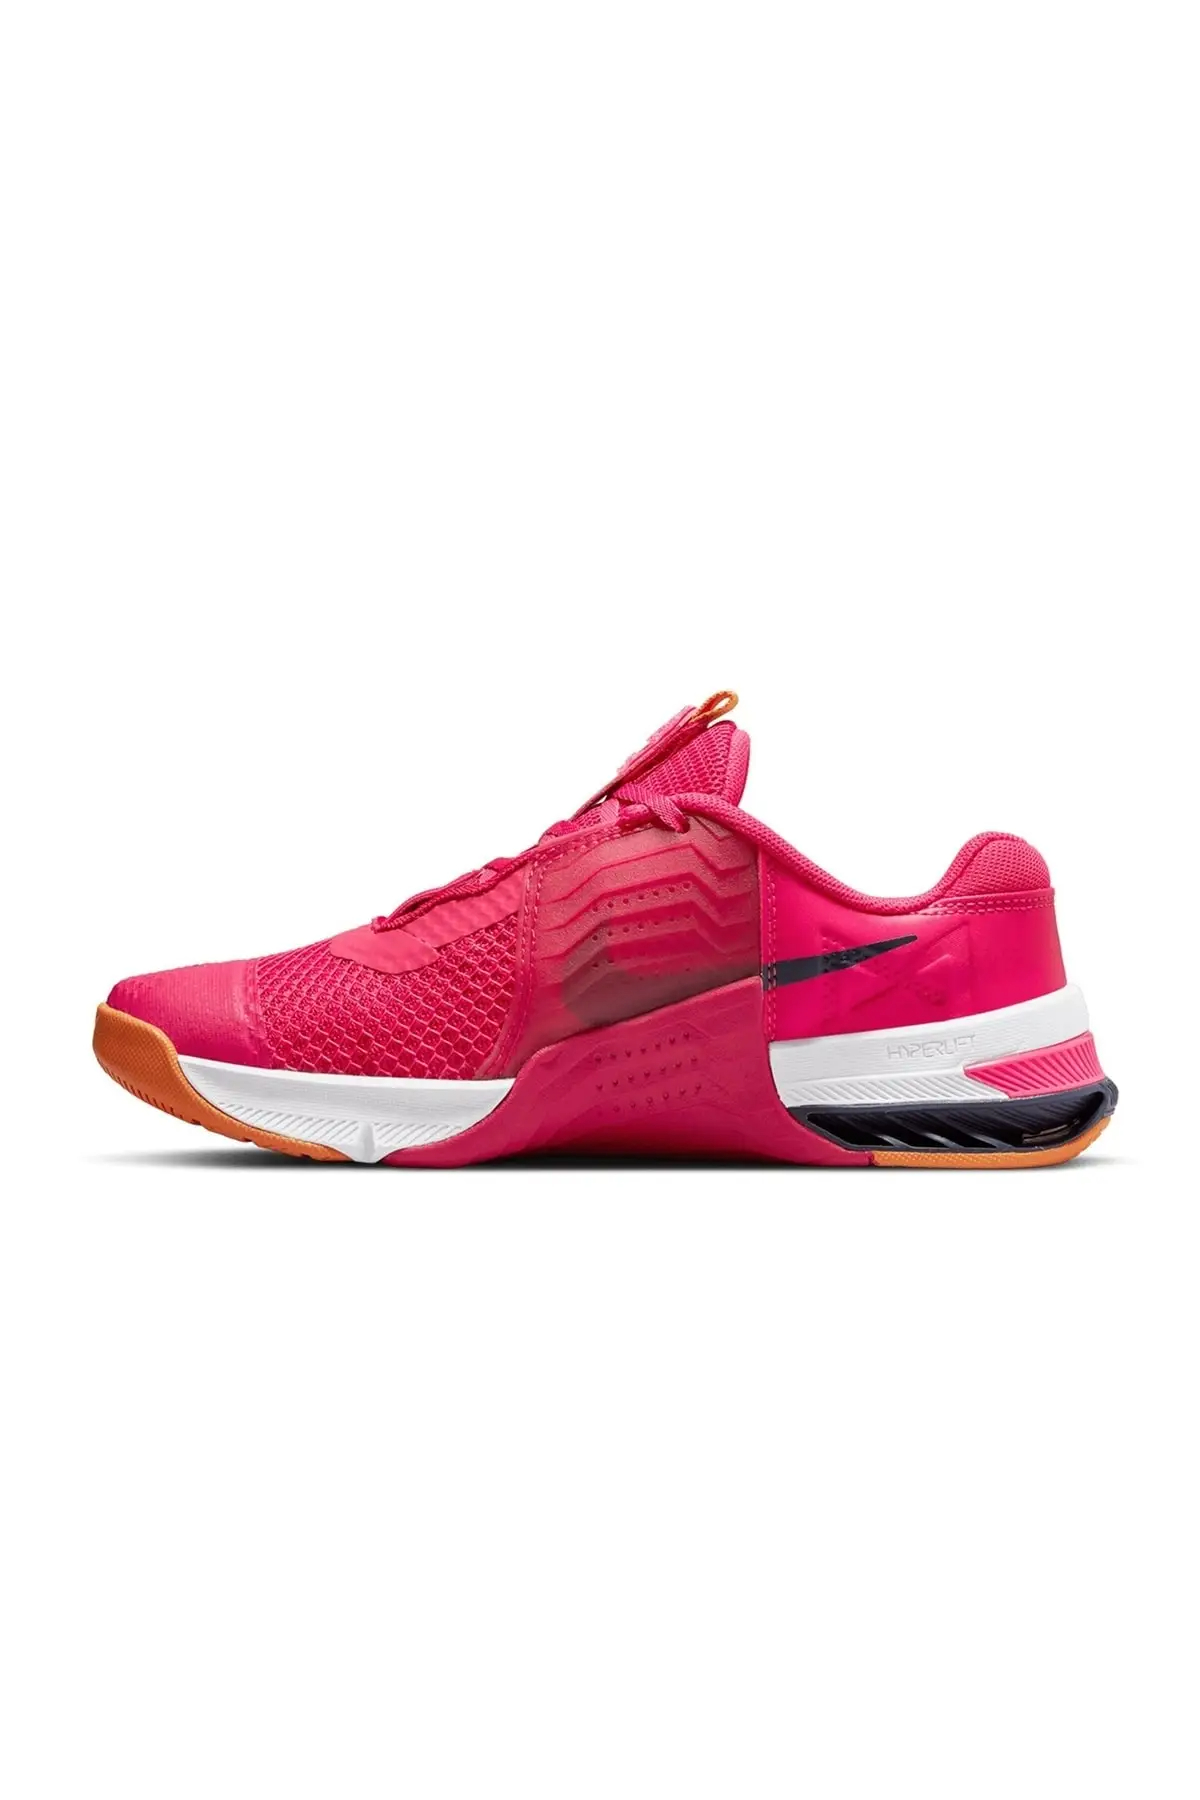 The allure of pink nike shoes women’s插图1